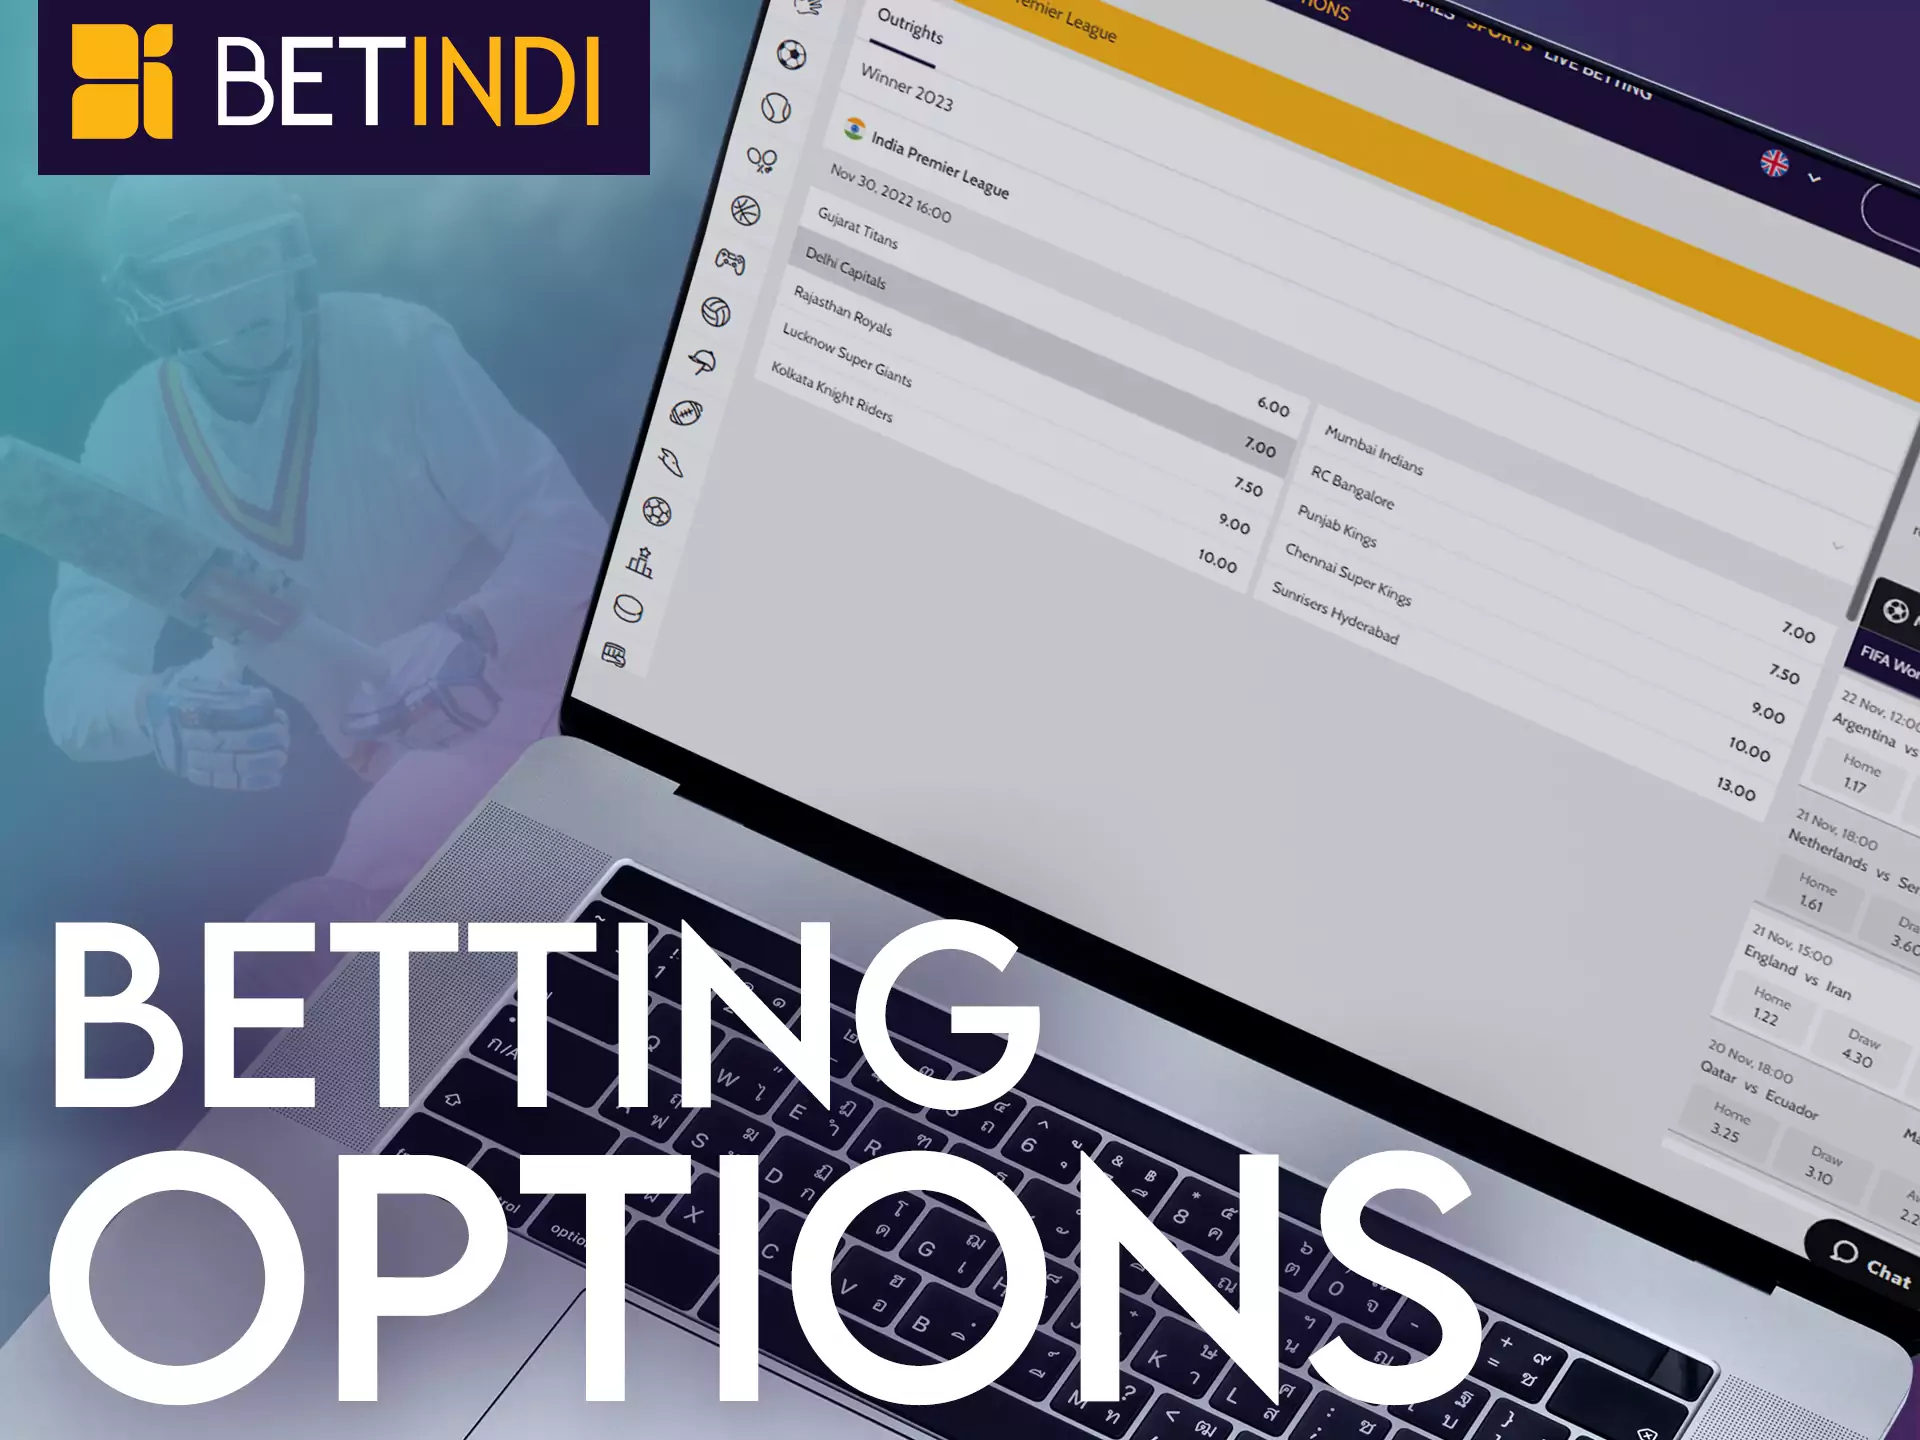 Find out all about possible betting options on Betindi.